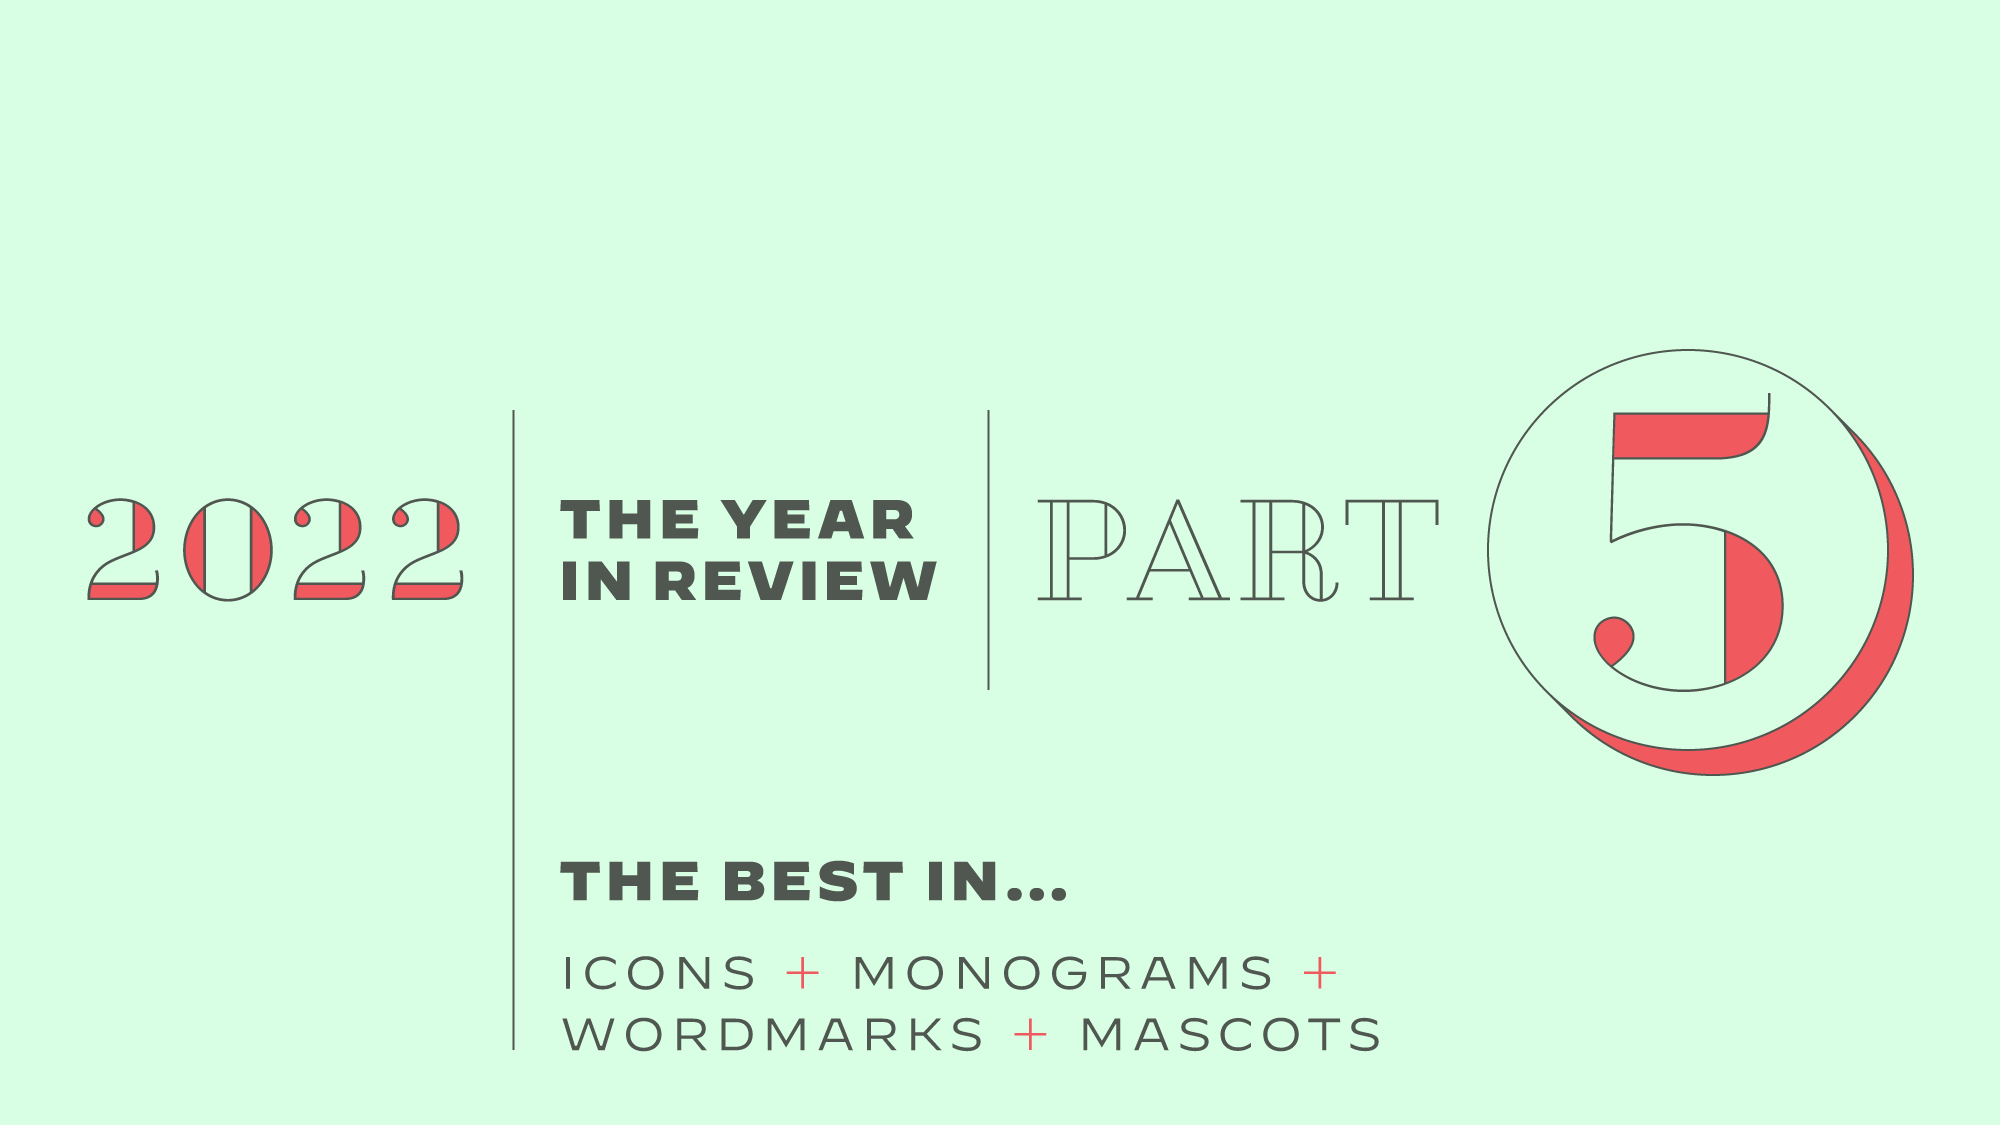 The Year in Review, Part 5: The Best in Icons, Monograms, Wordmarks, and Mascots